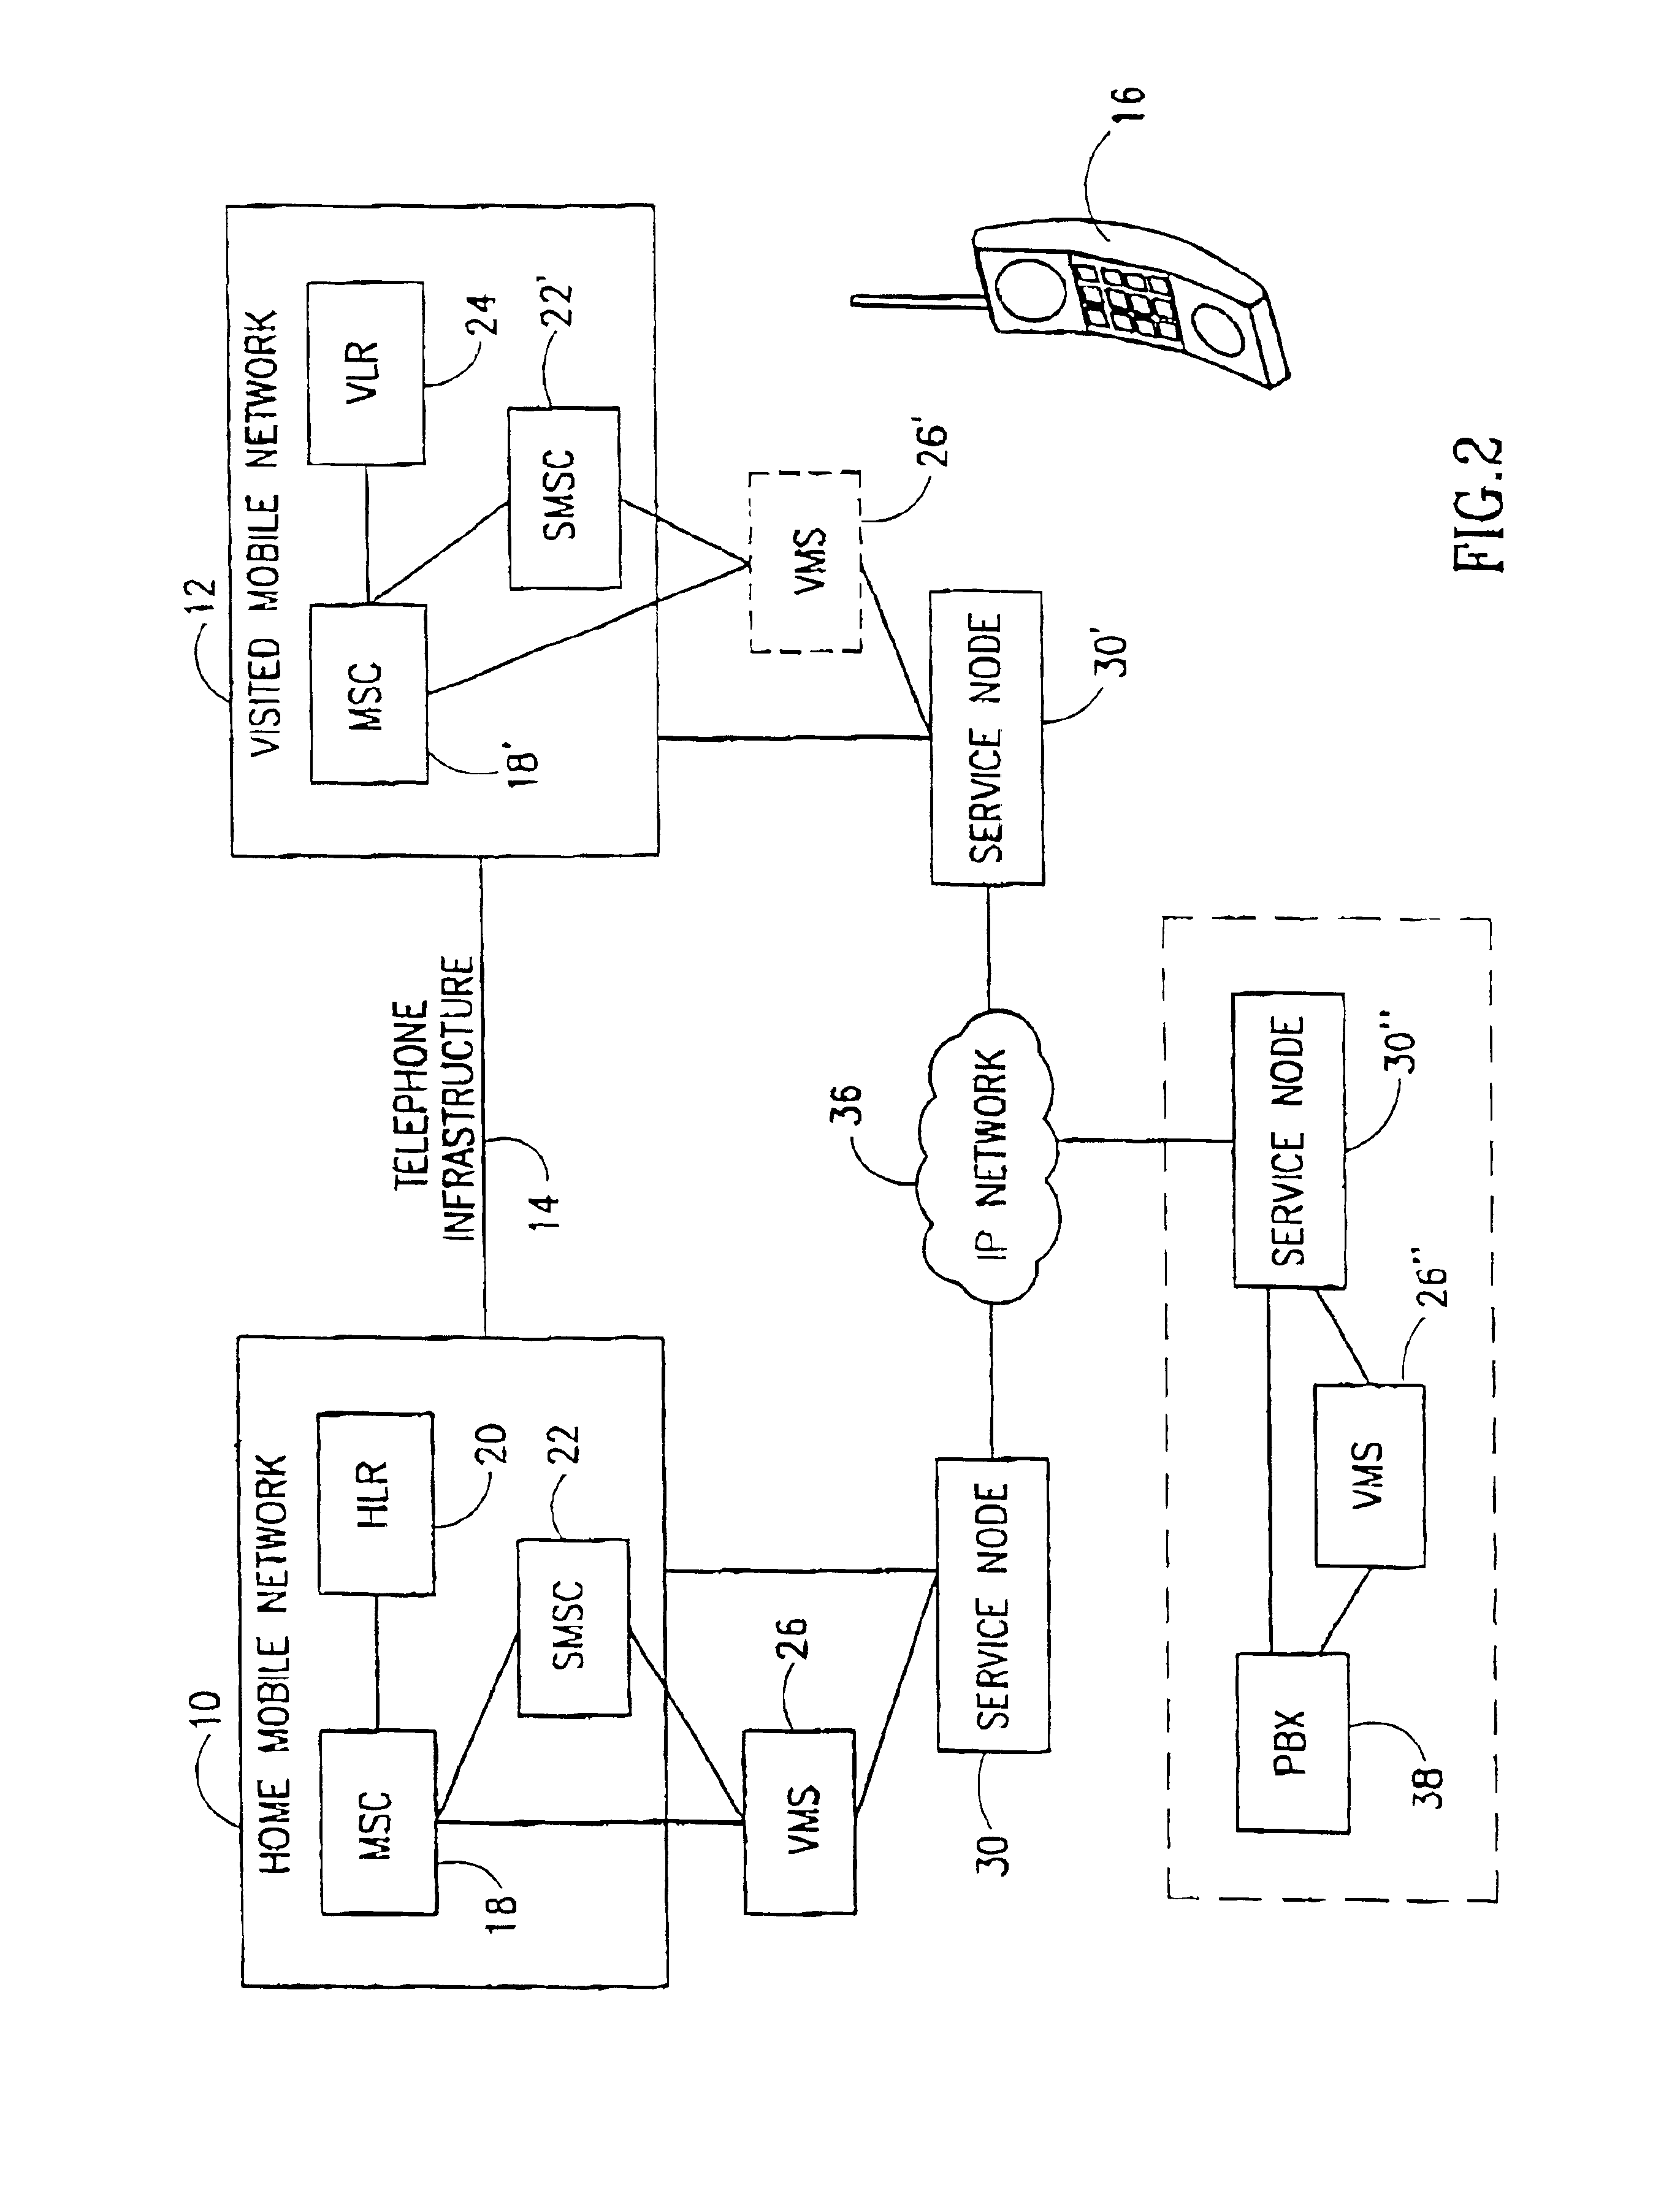 System and method for providing access to value added services for roaming users of mobile telephones